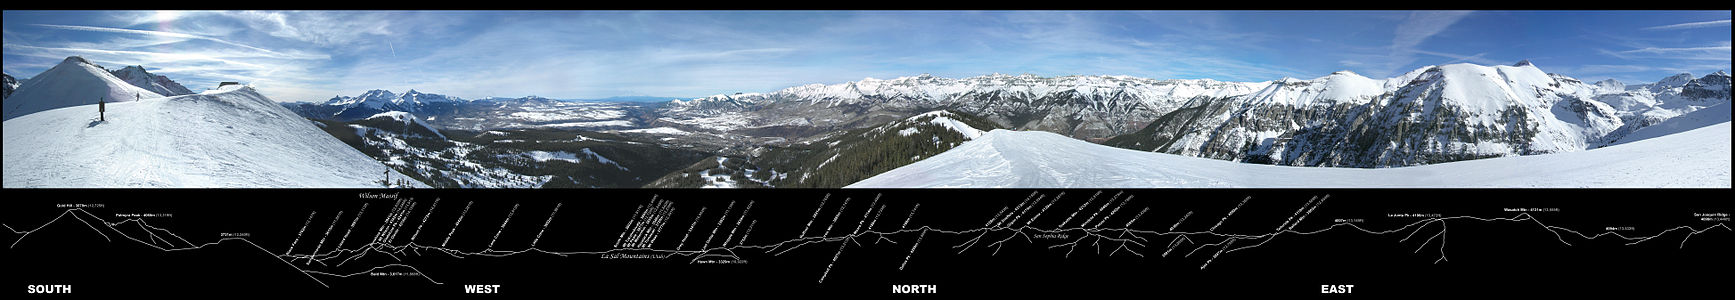 360° panorama of the southwestern San Juans, photographed from the Gold Hill Ridge of the Telluride Ski Resort.